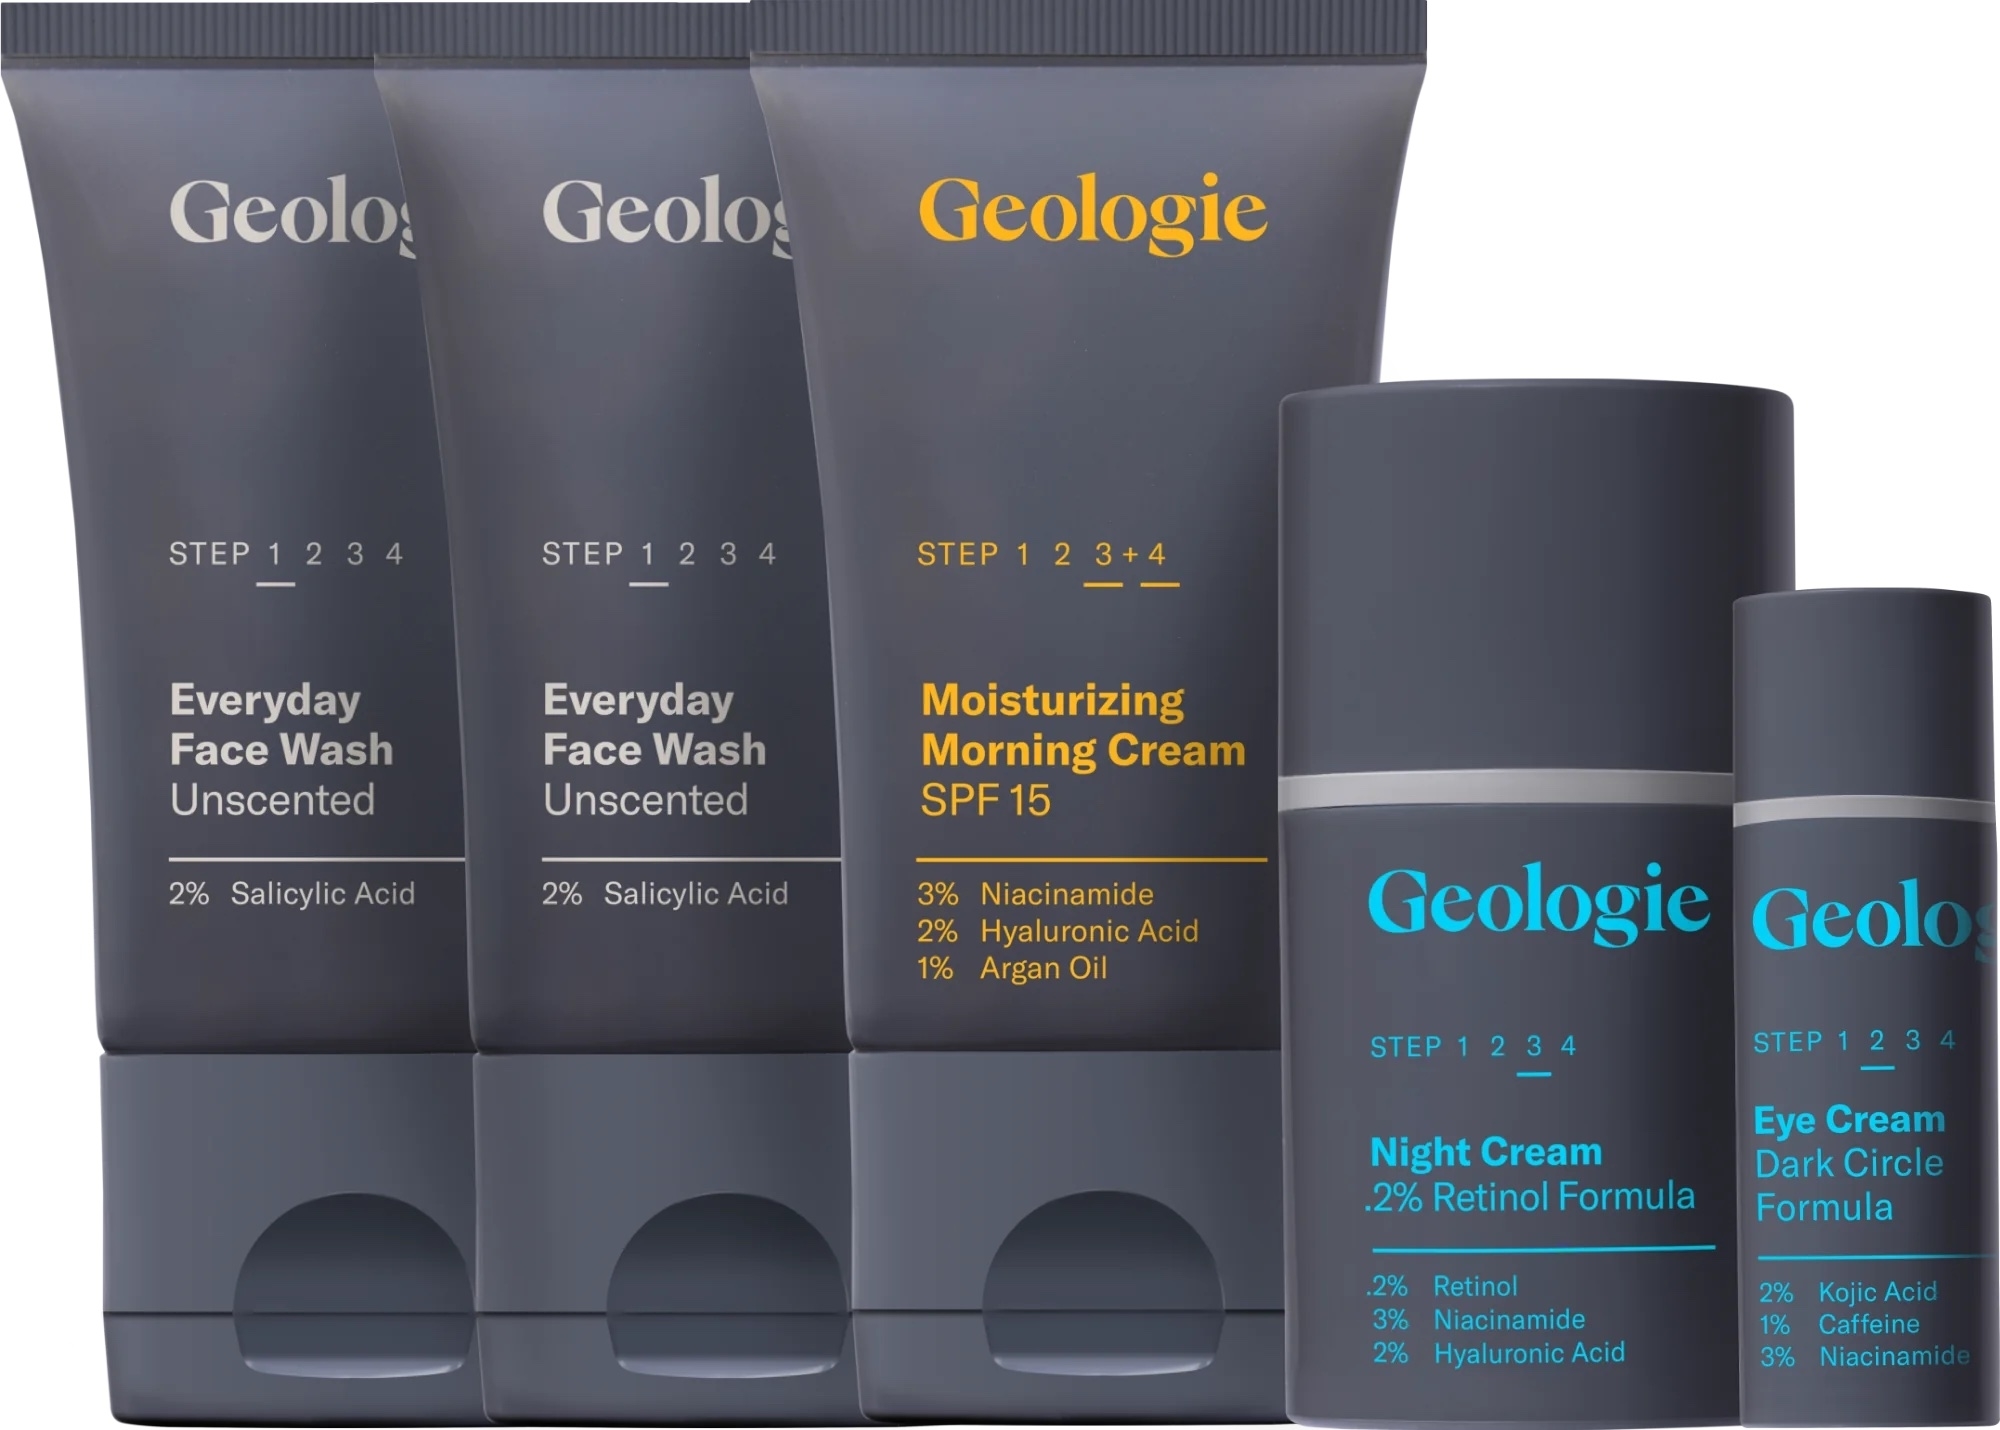 Geologie skincare set with cleansers, morning cream, night cream, and eye cream, labeled with step numbers and ingredients